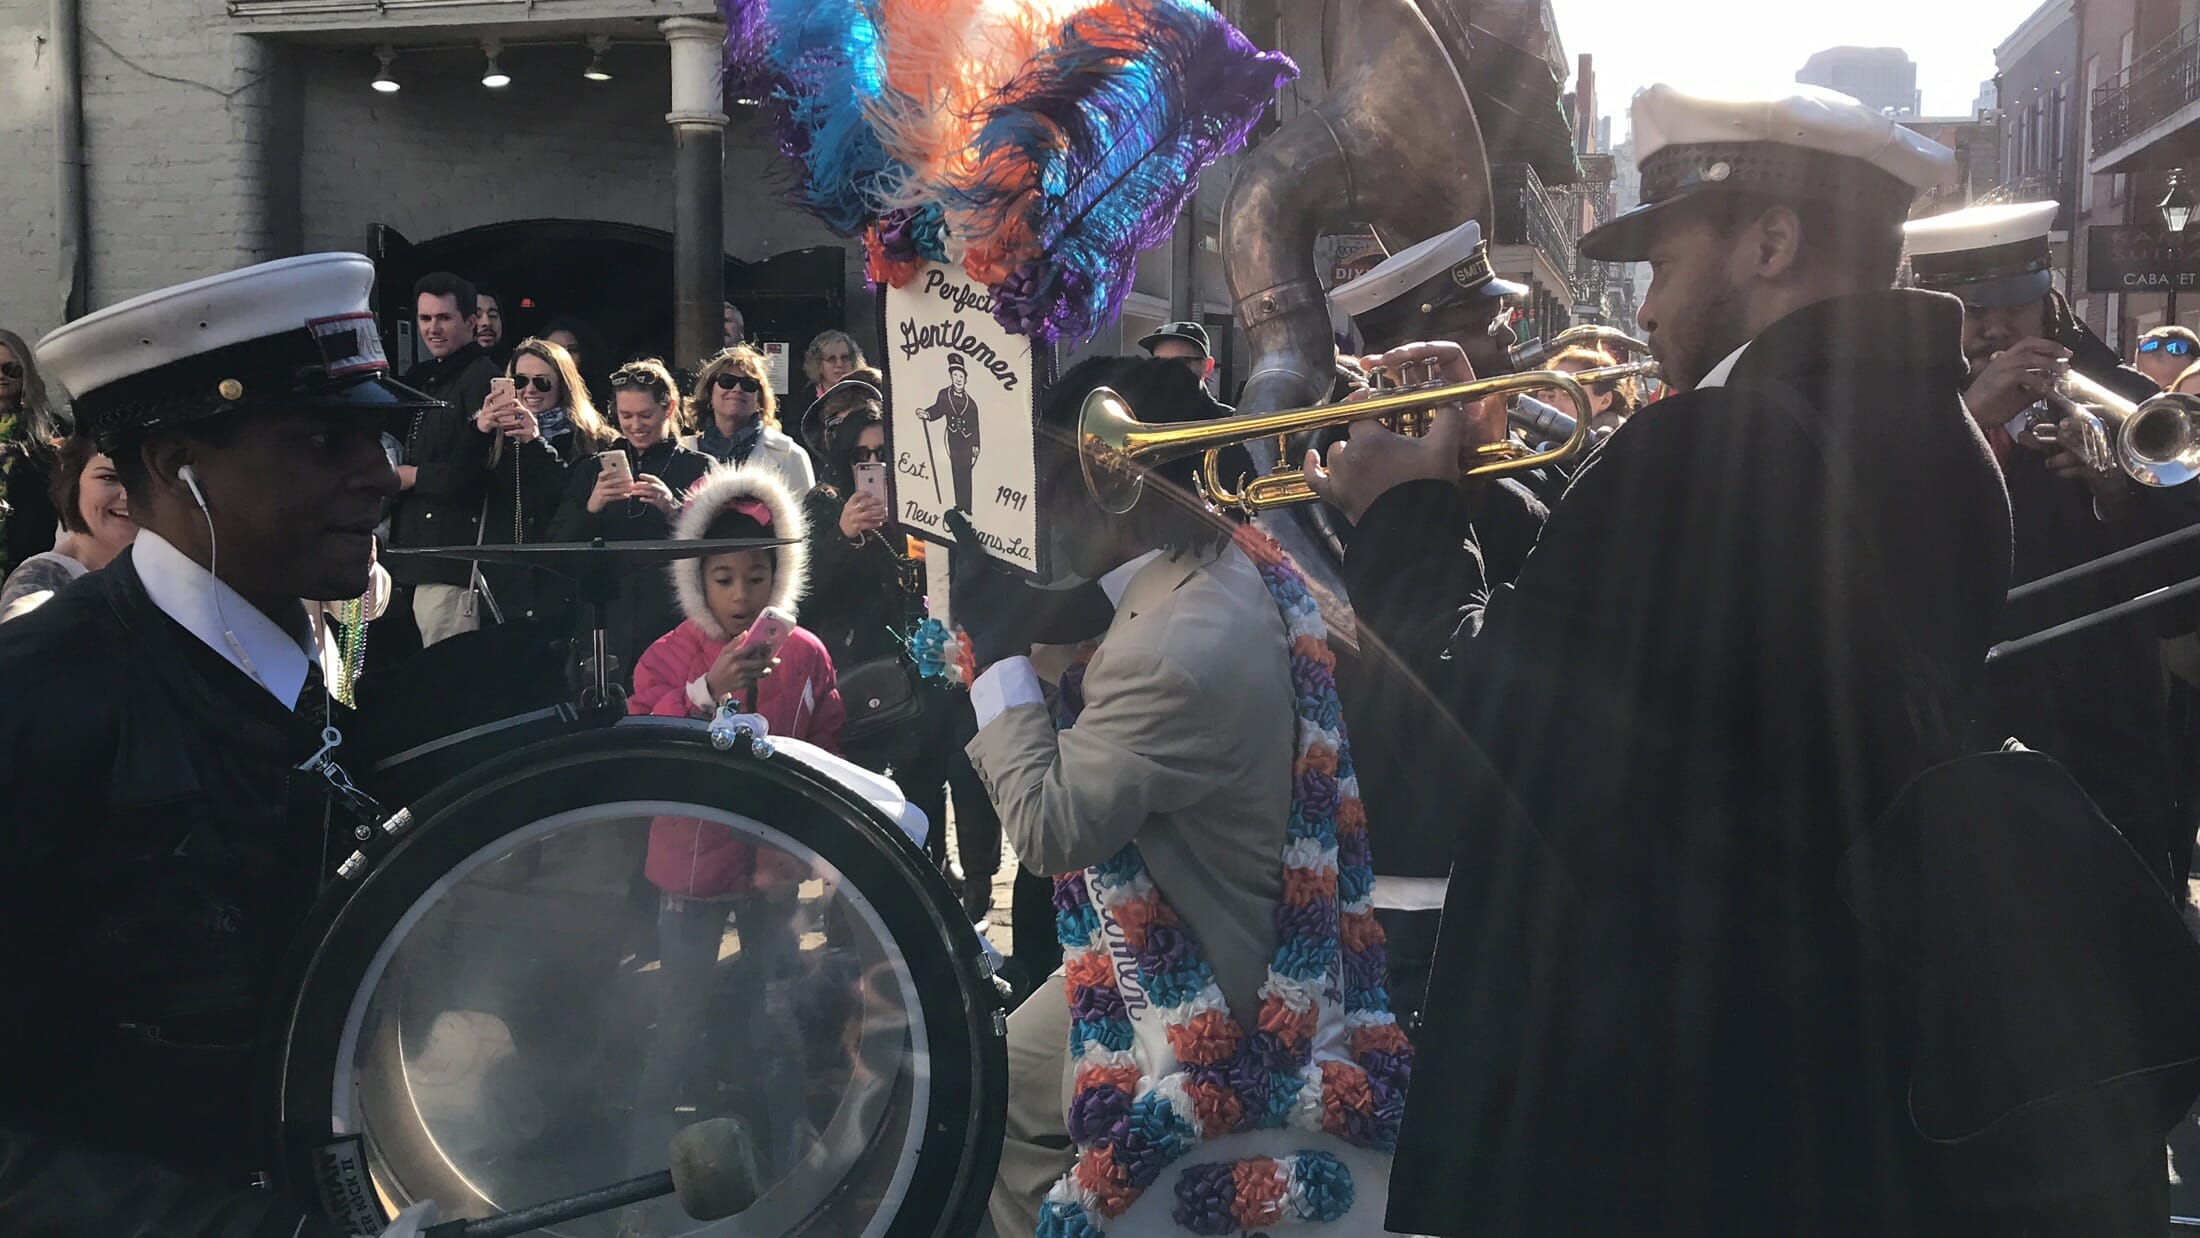 A Street Parade in New Orleans